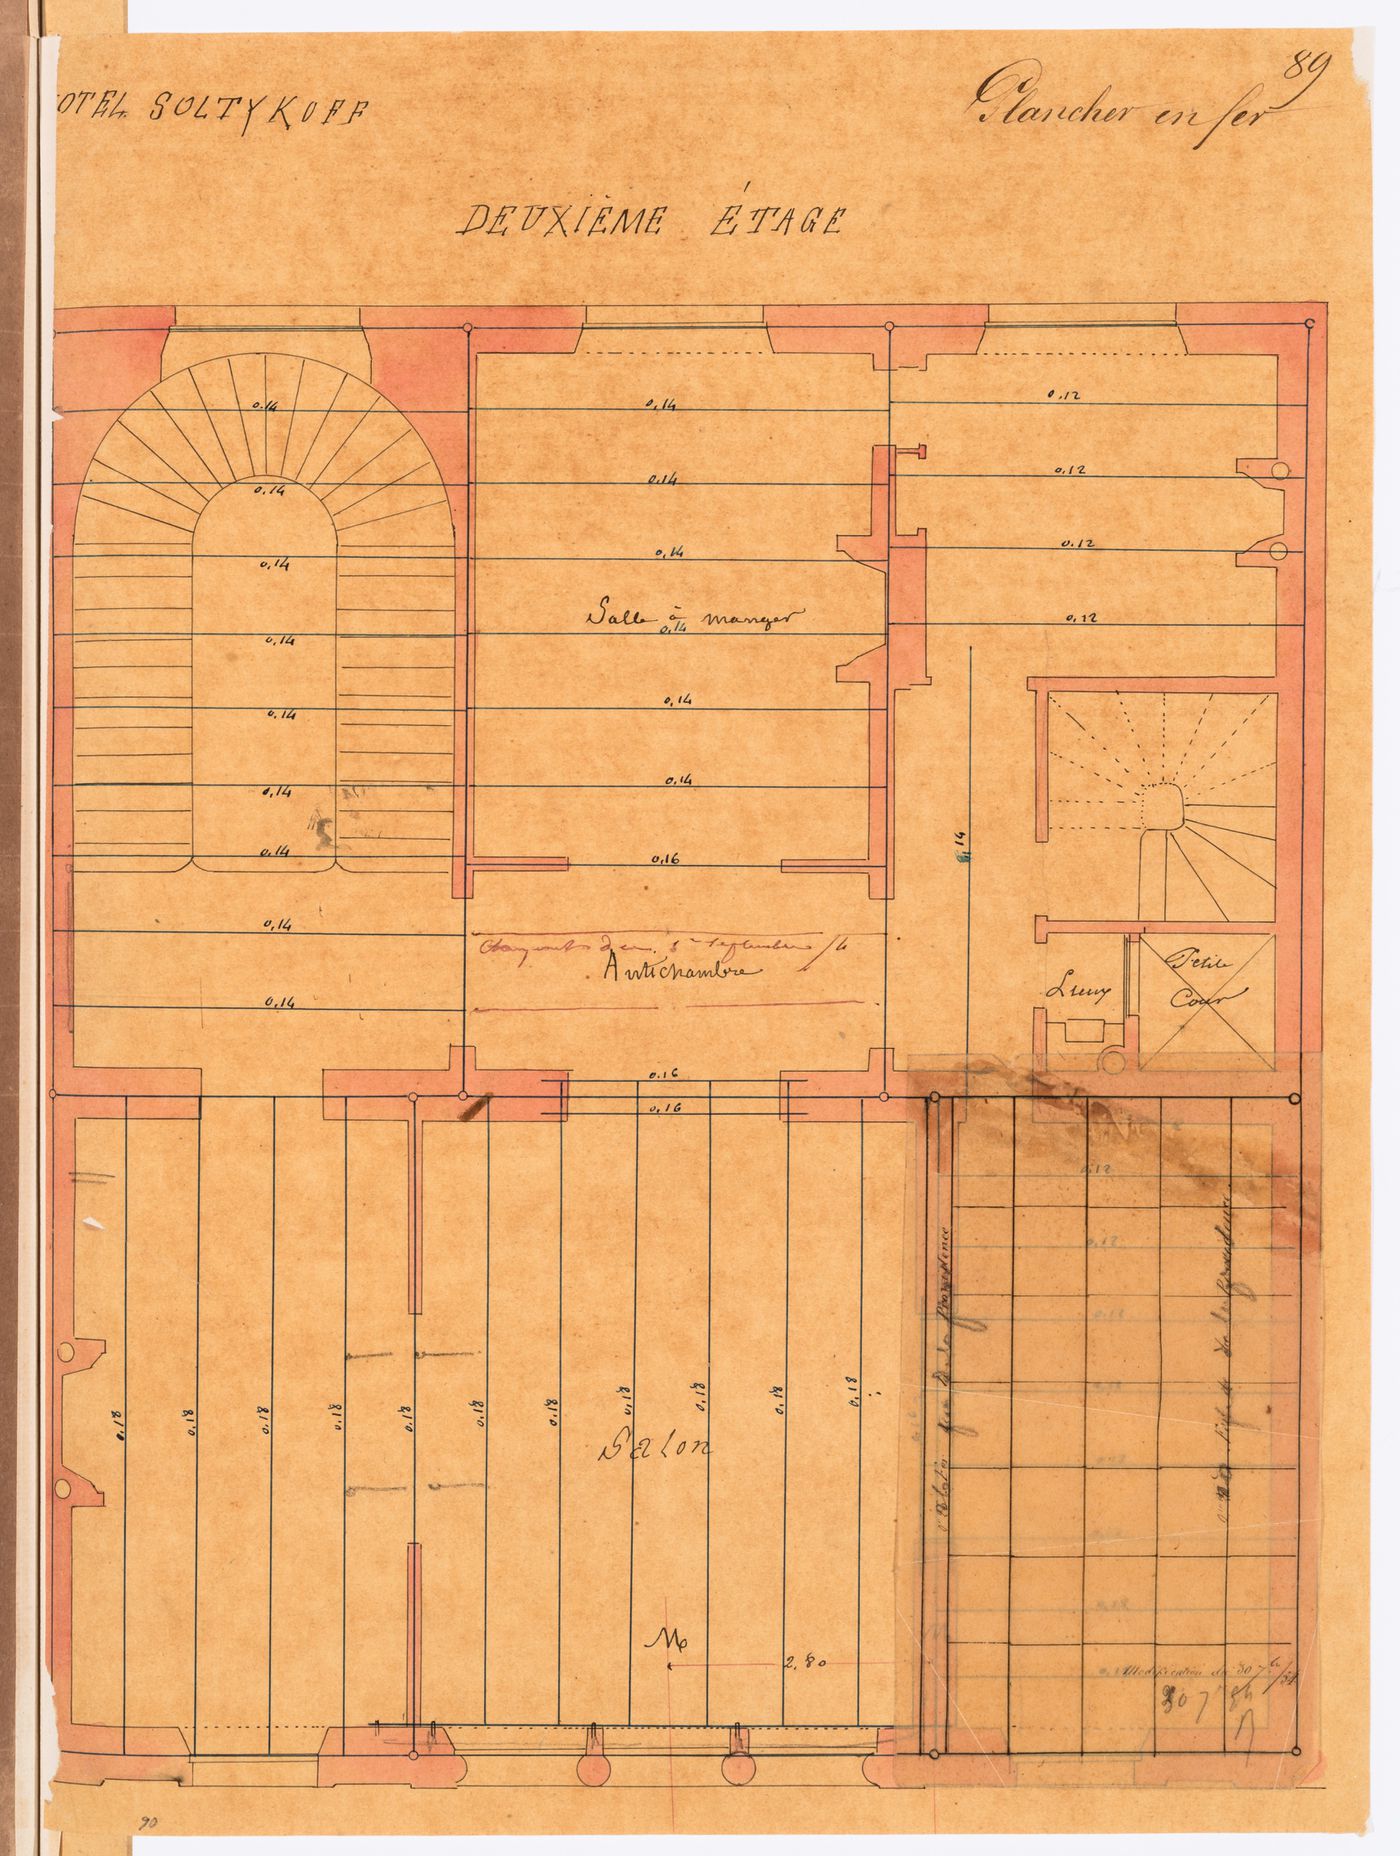 Second floor plan indicating the location of iron beams, Hôtel Soltykoff